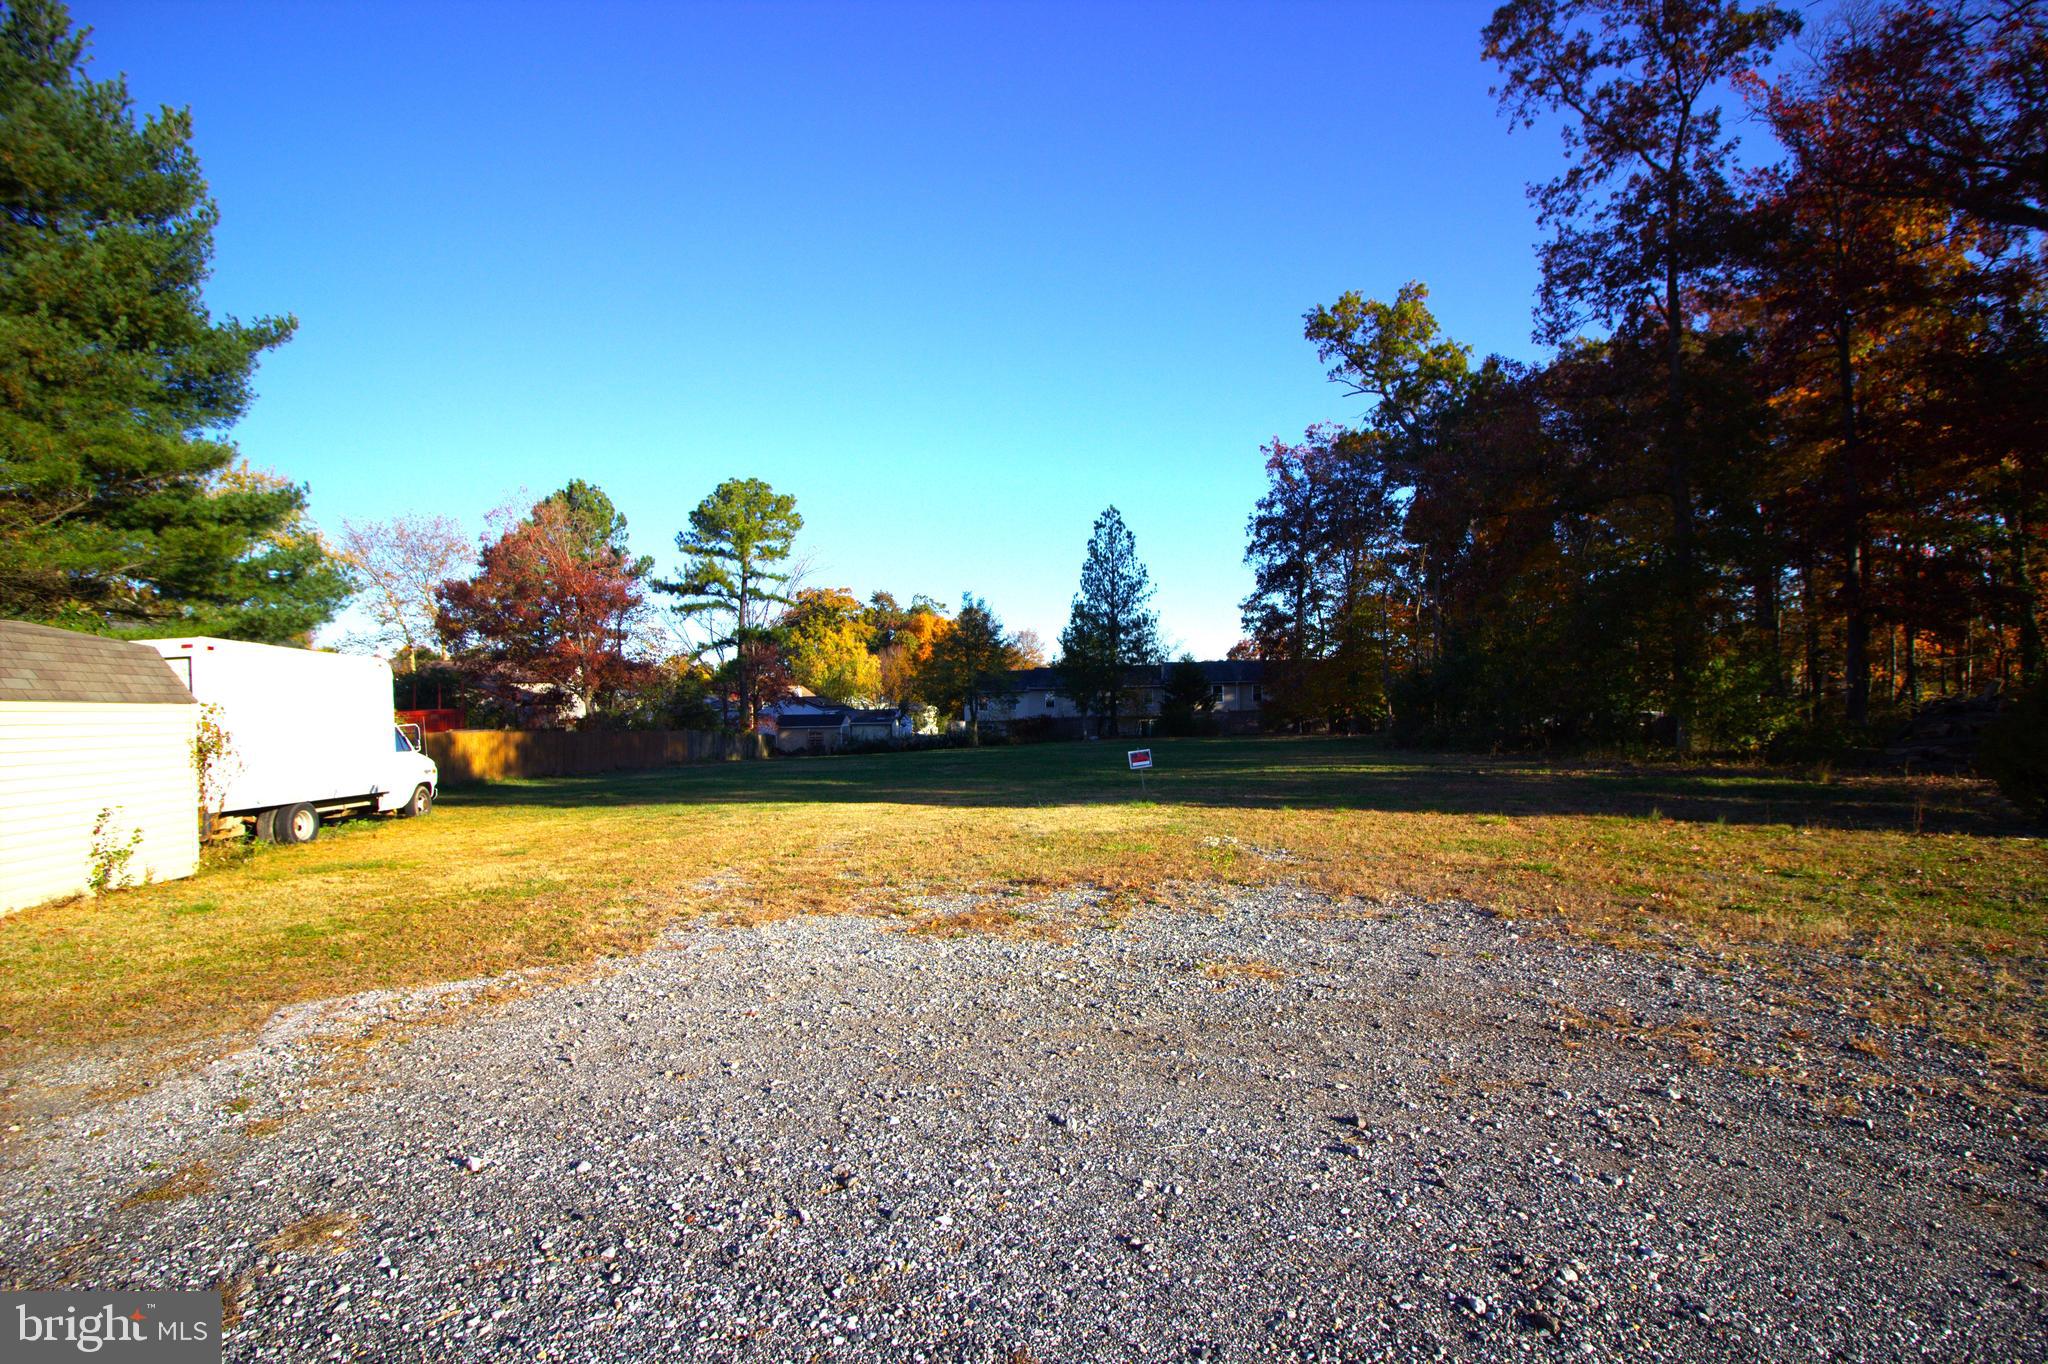 a view of a yard